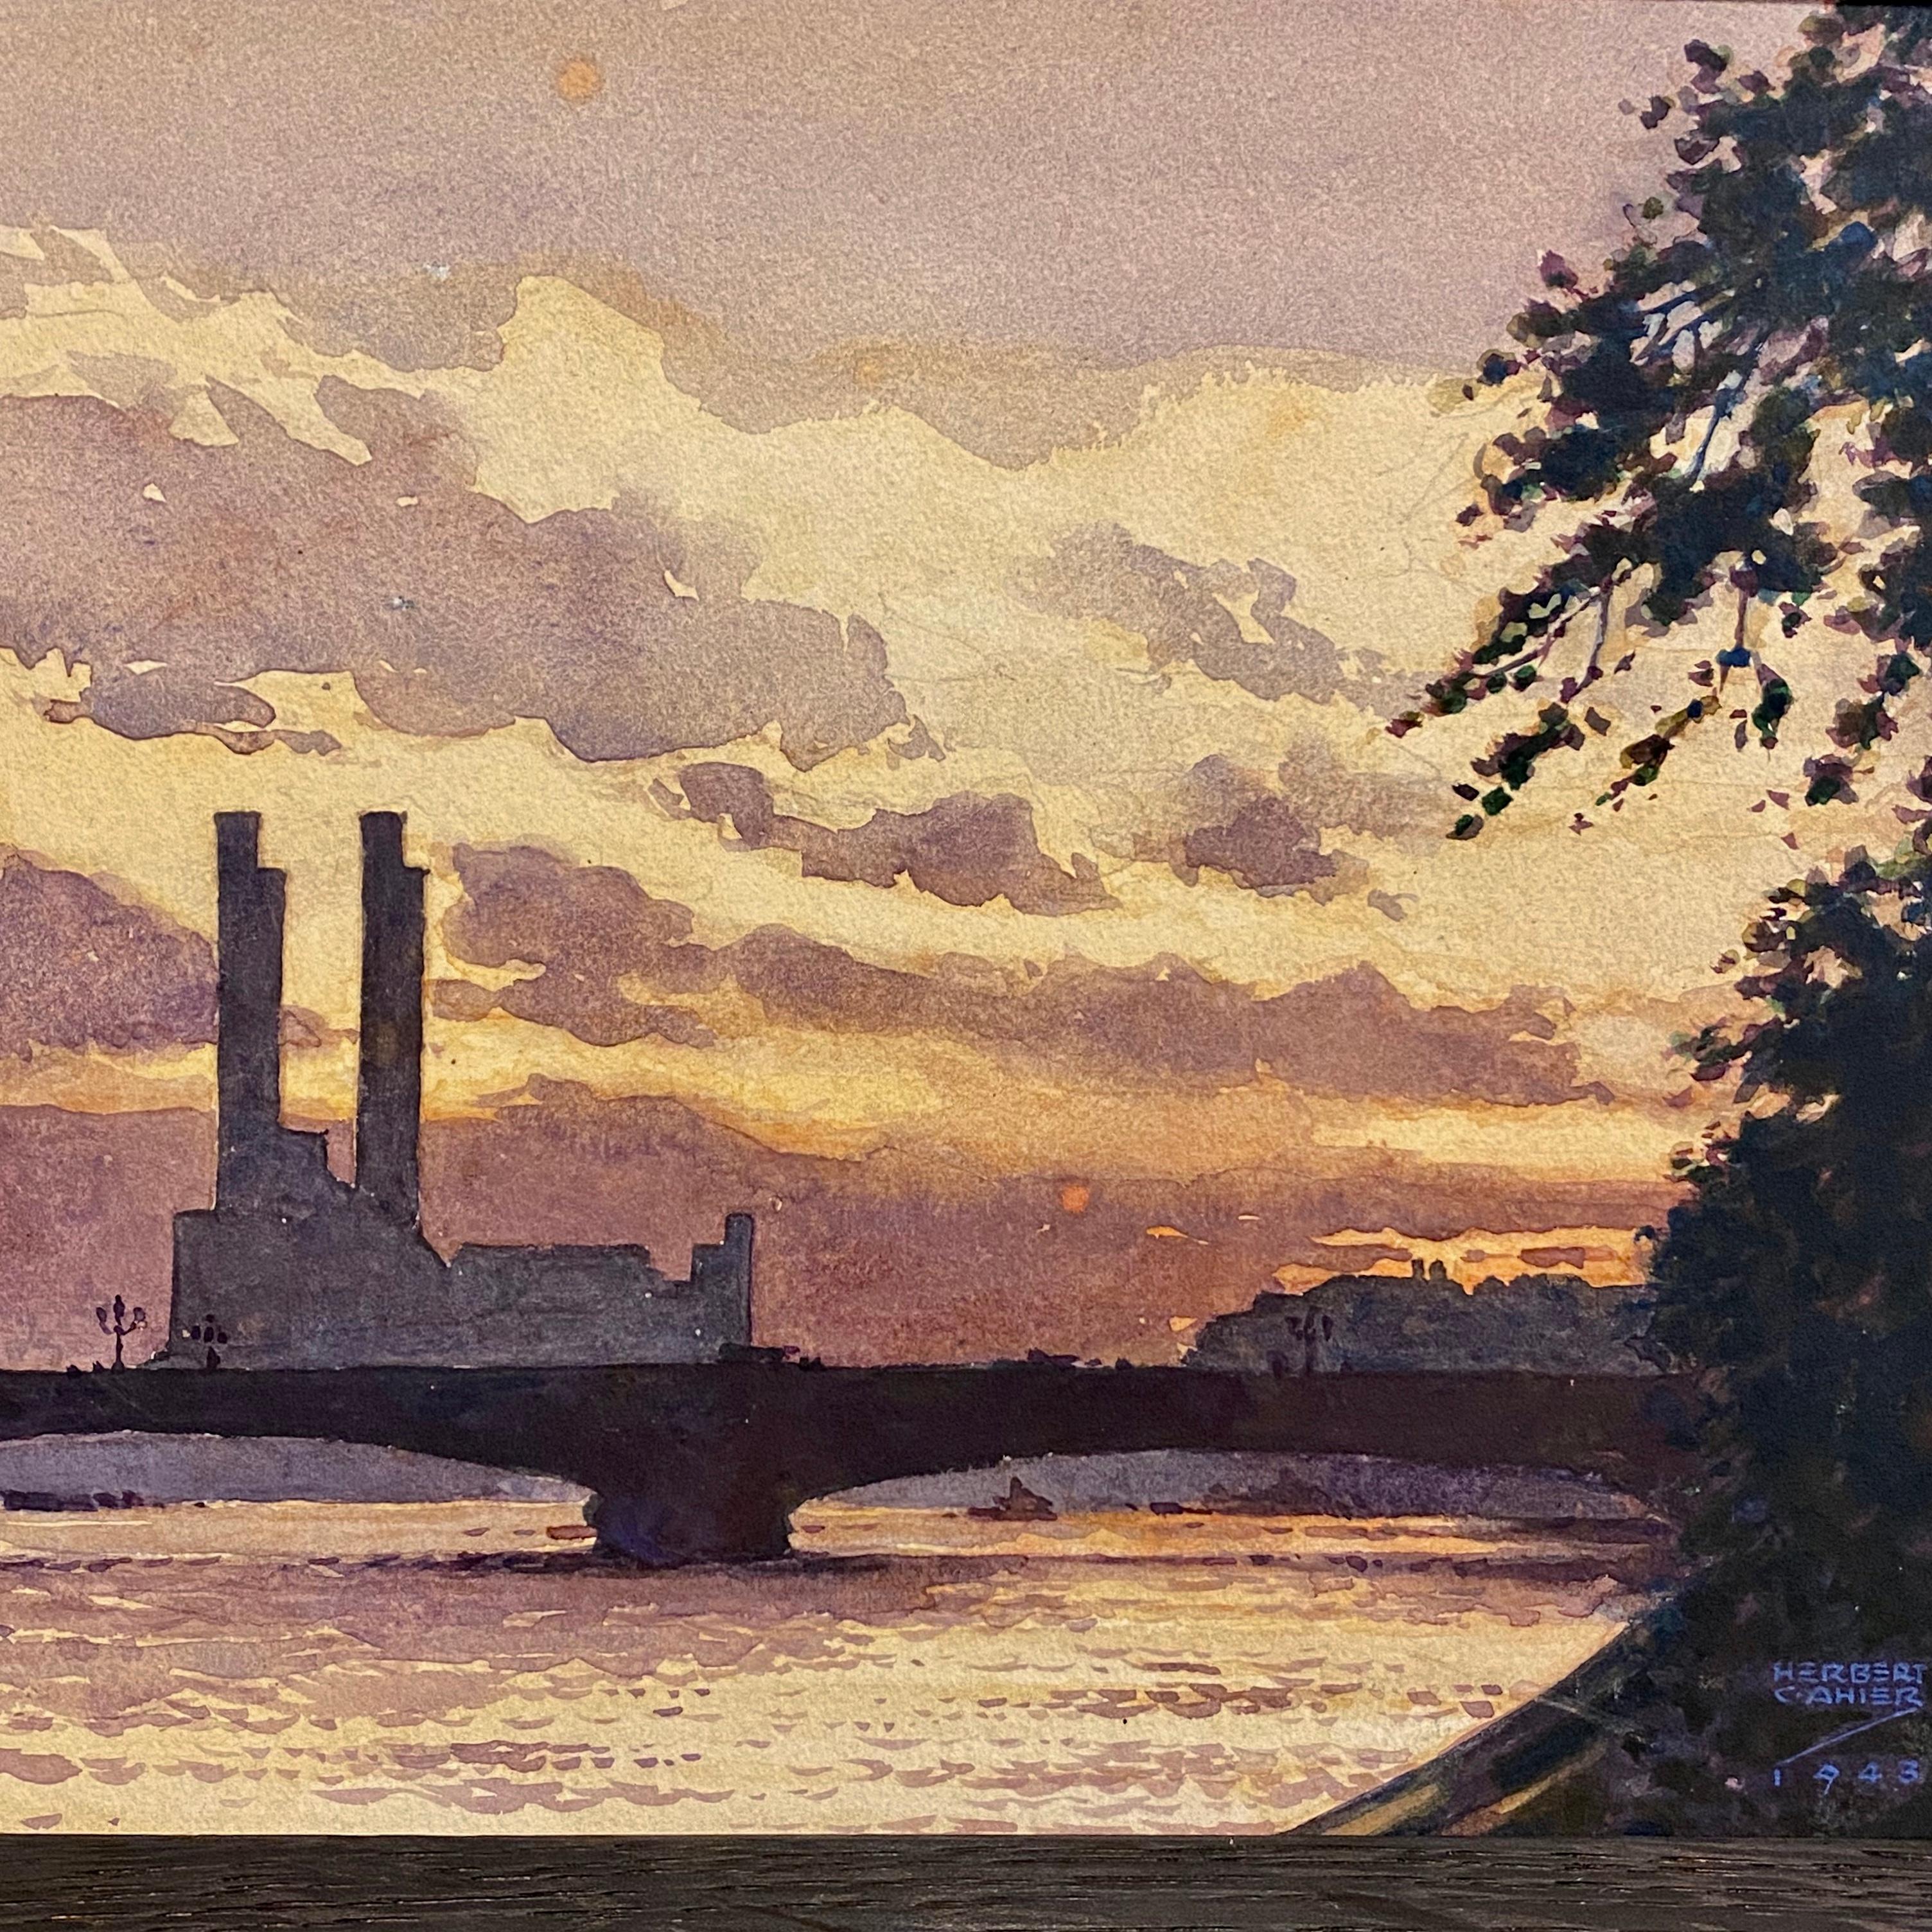 Mid-20th Century Lots Road Power Station by Herbert Ahier, 1943